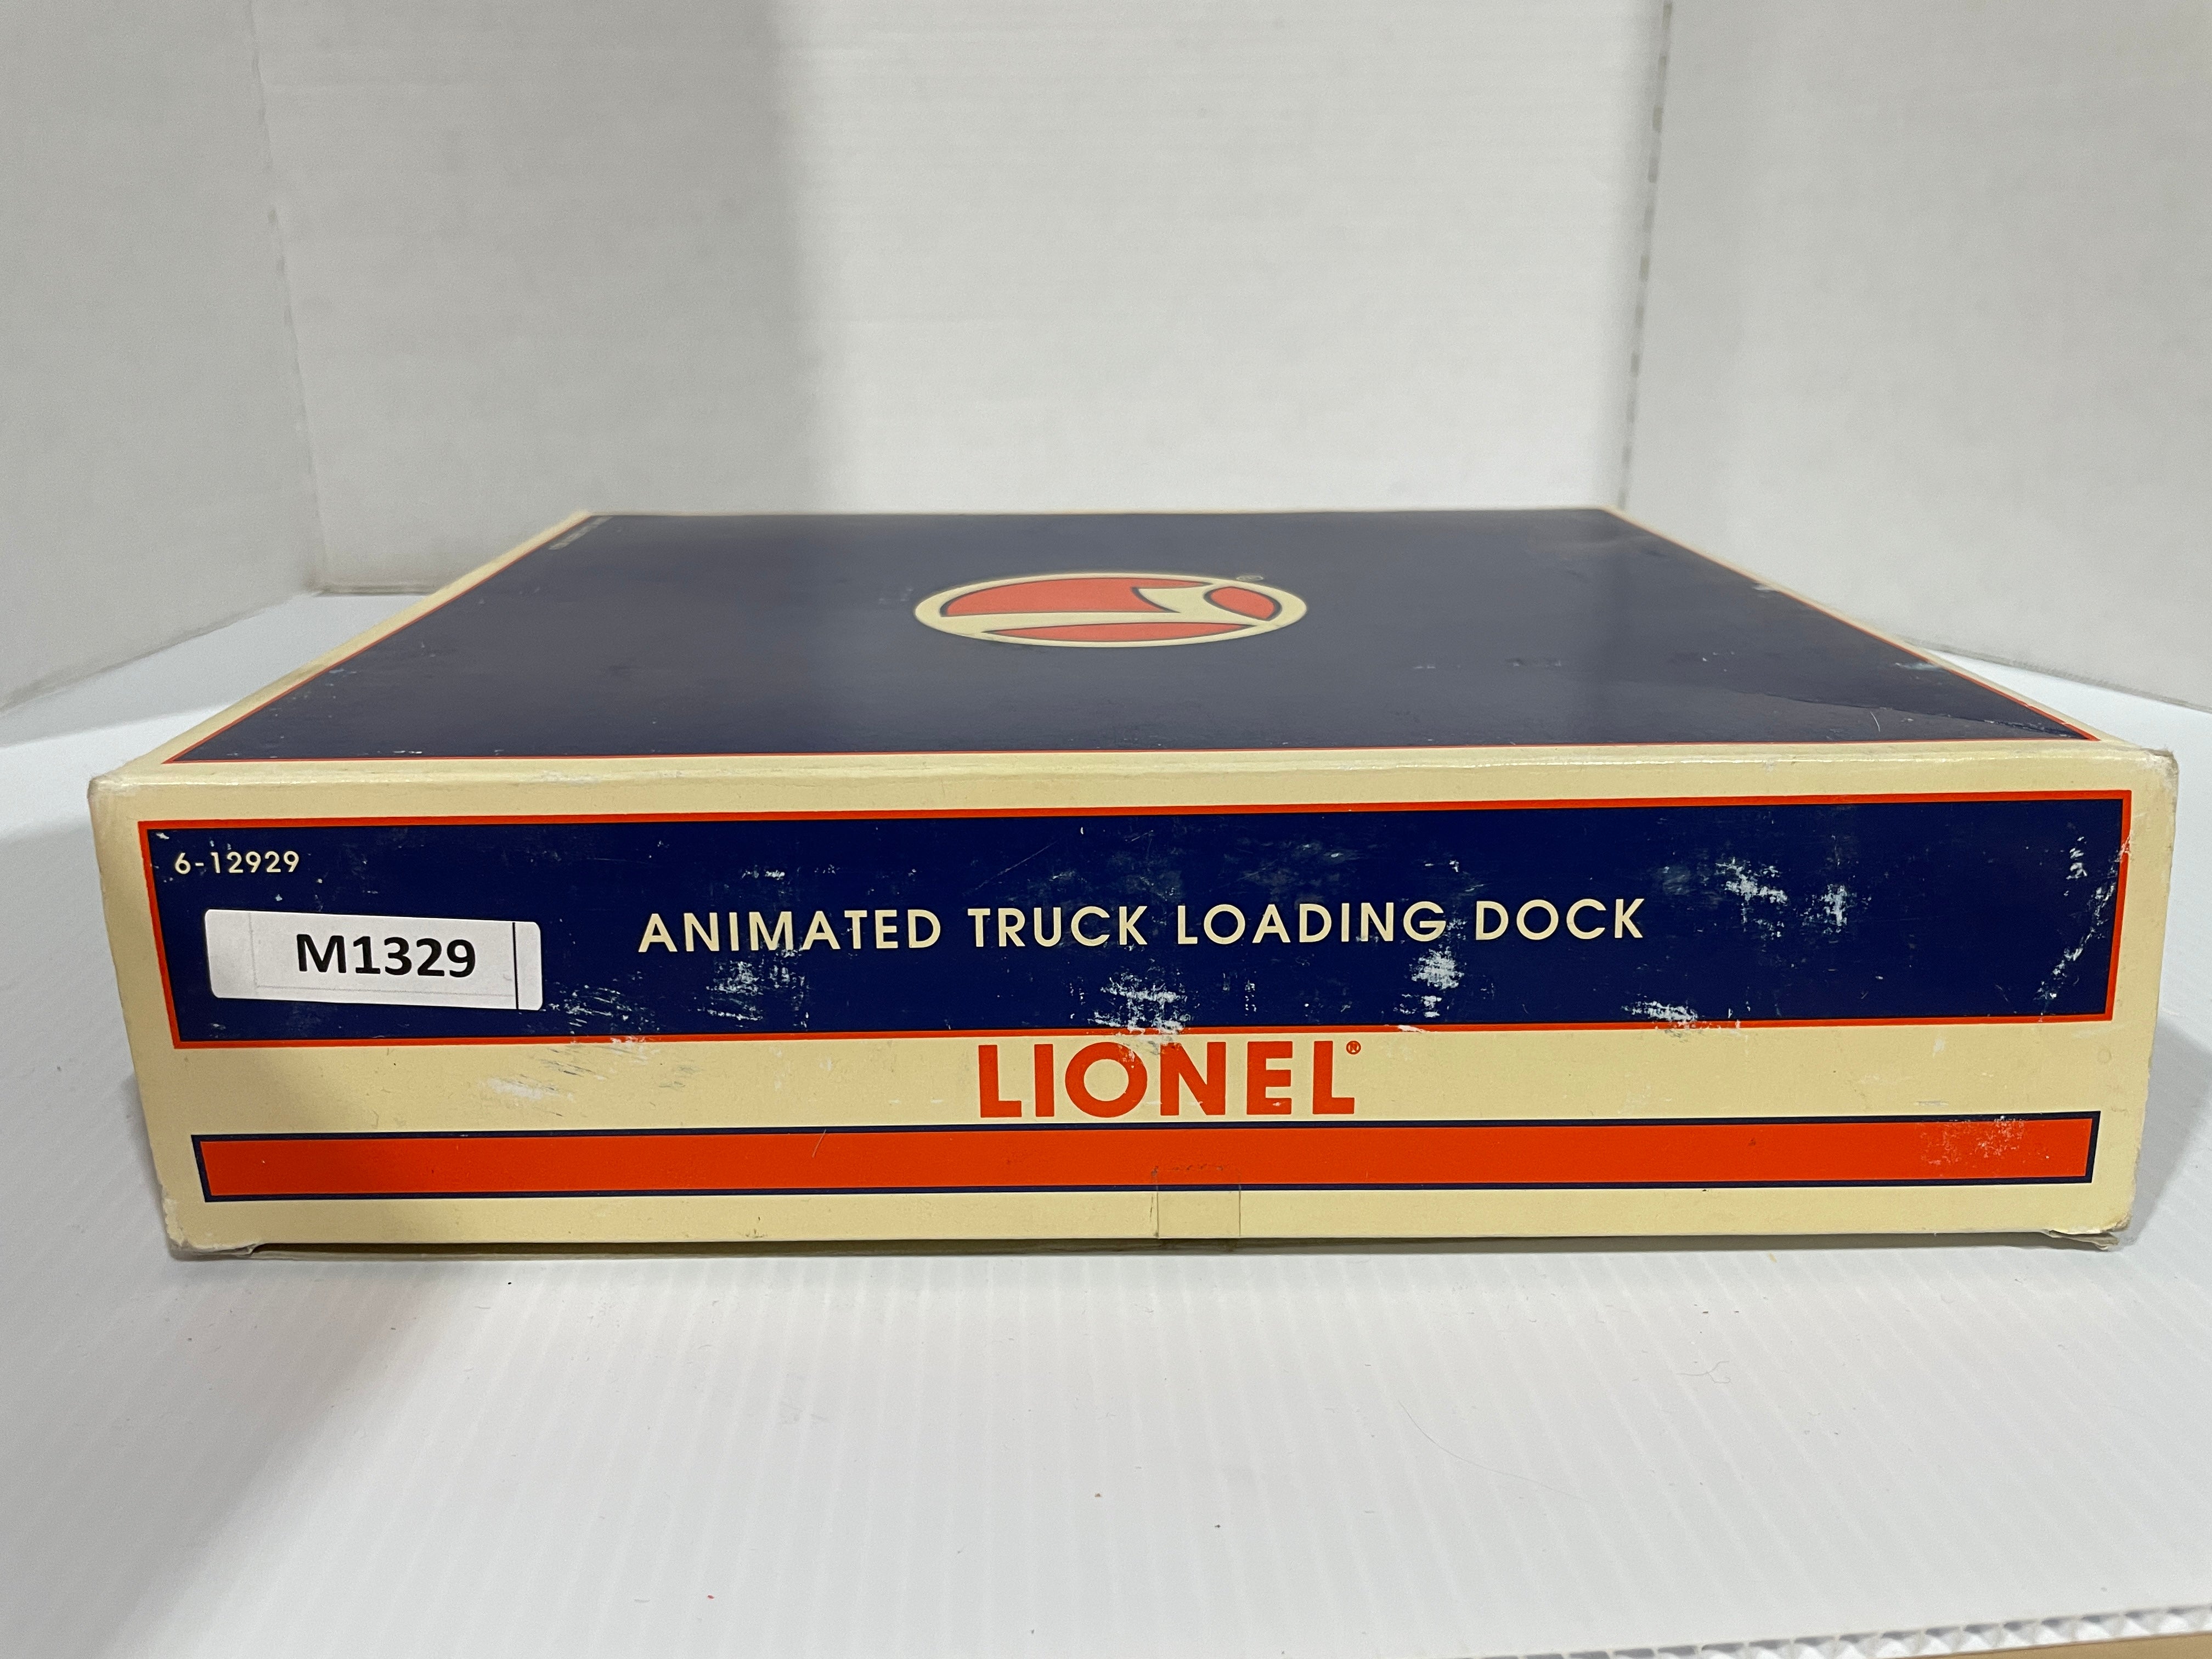 Lionel 6-12929 - Animated Truck Loading Dock - Second Hand - M1329